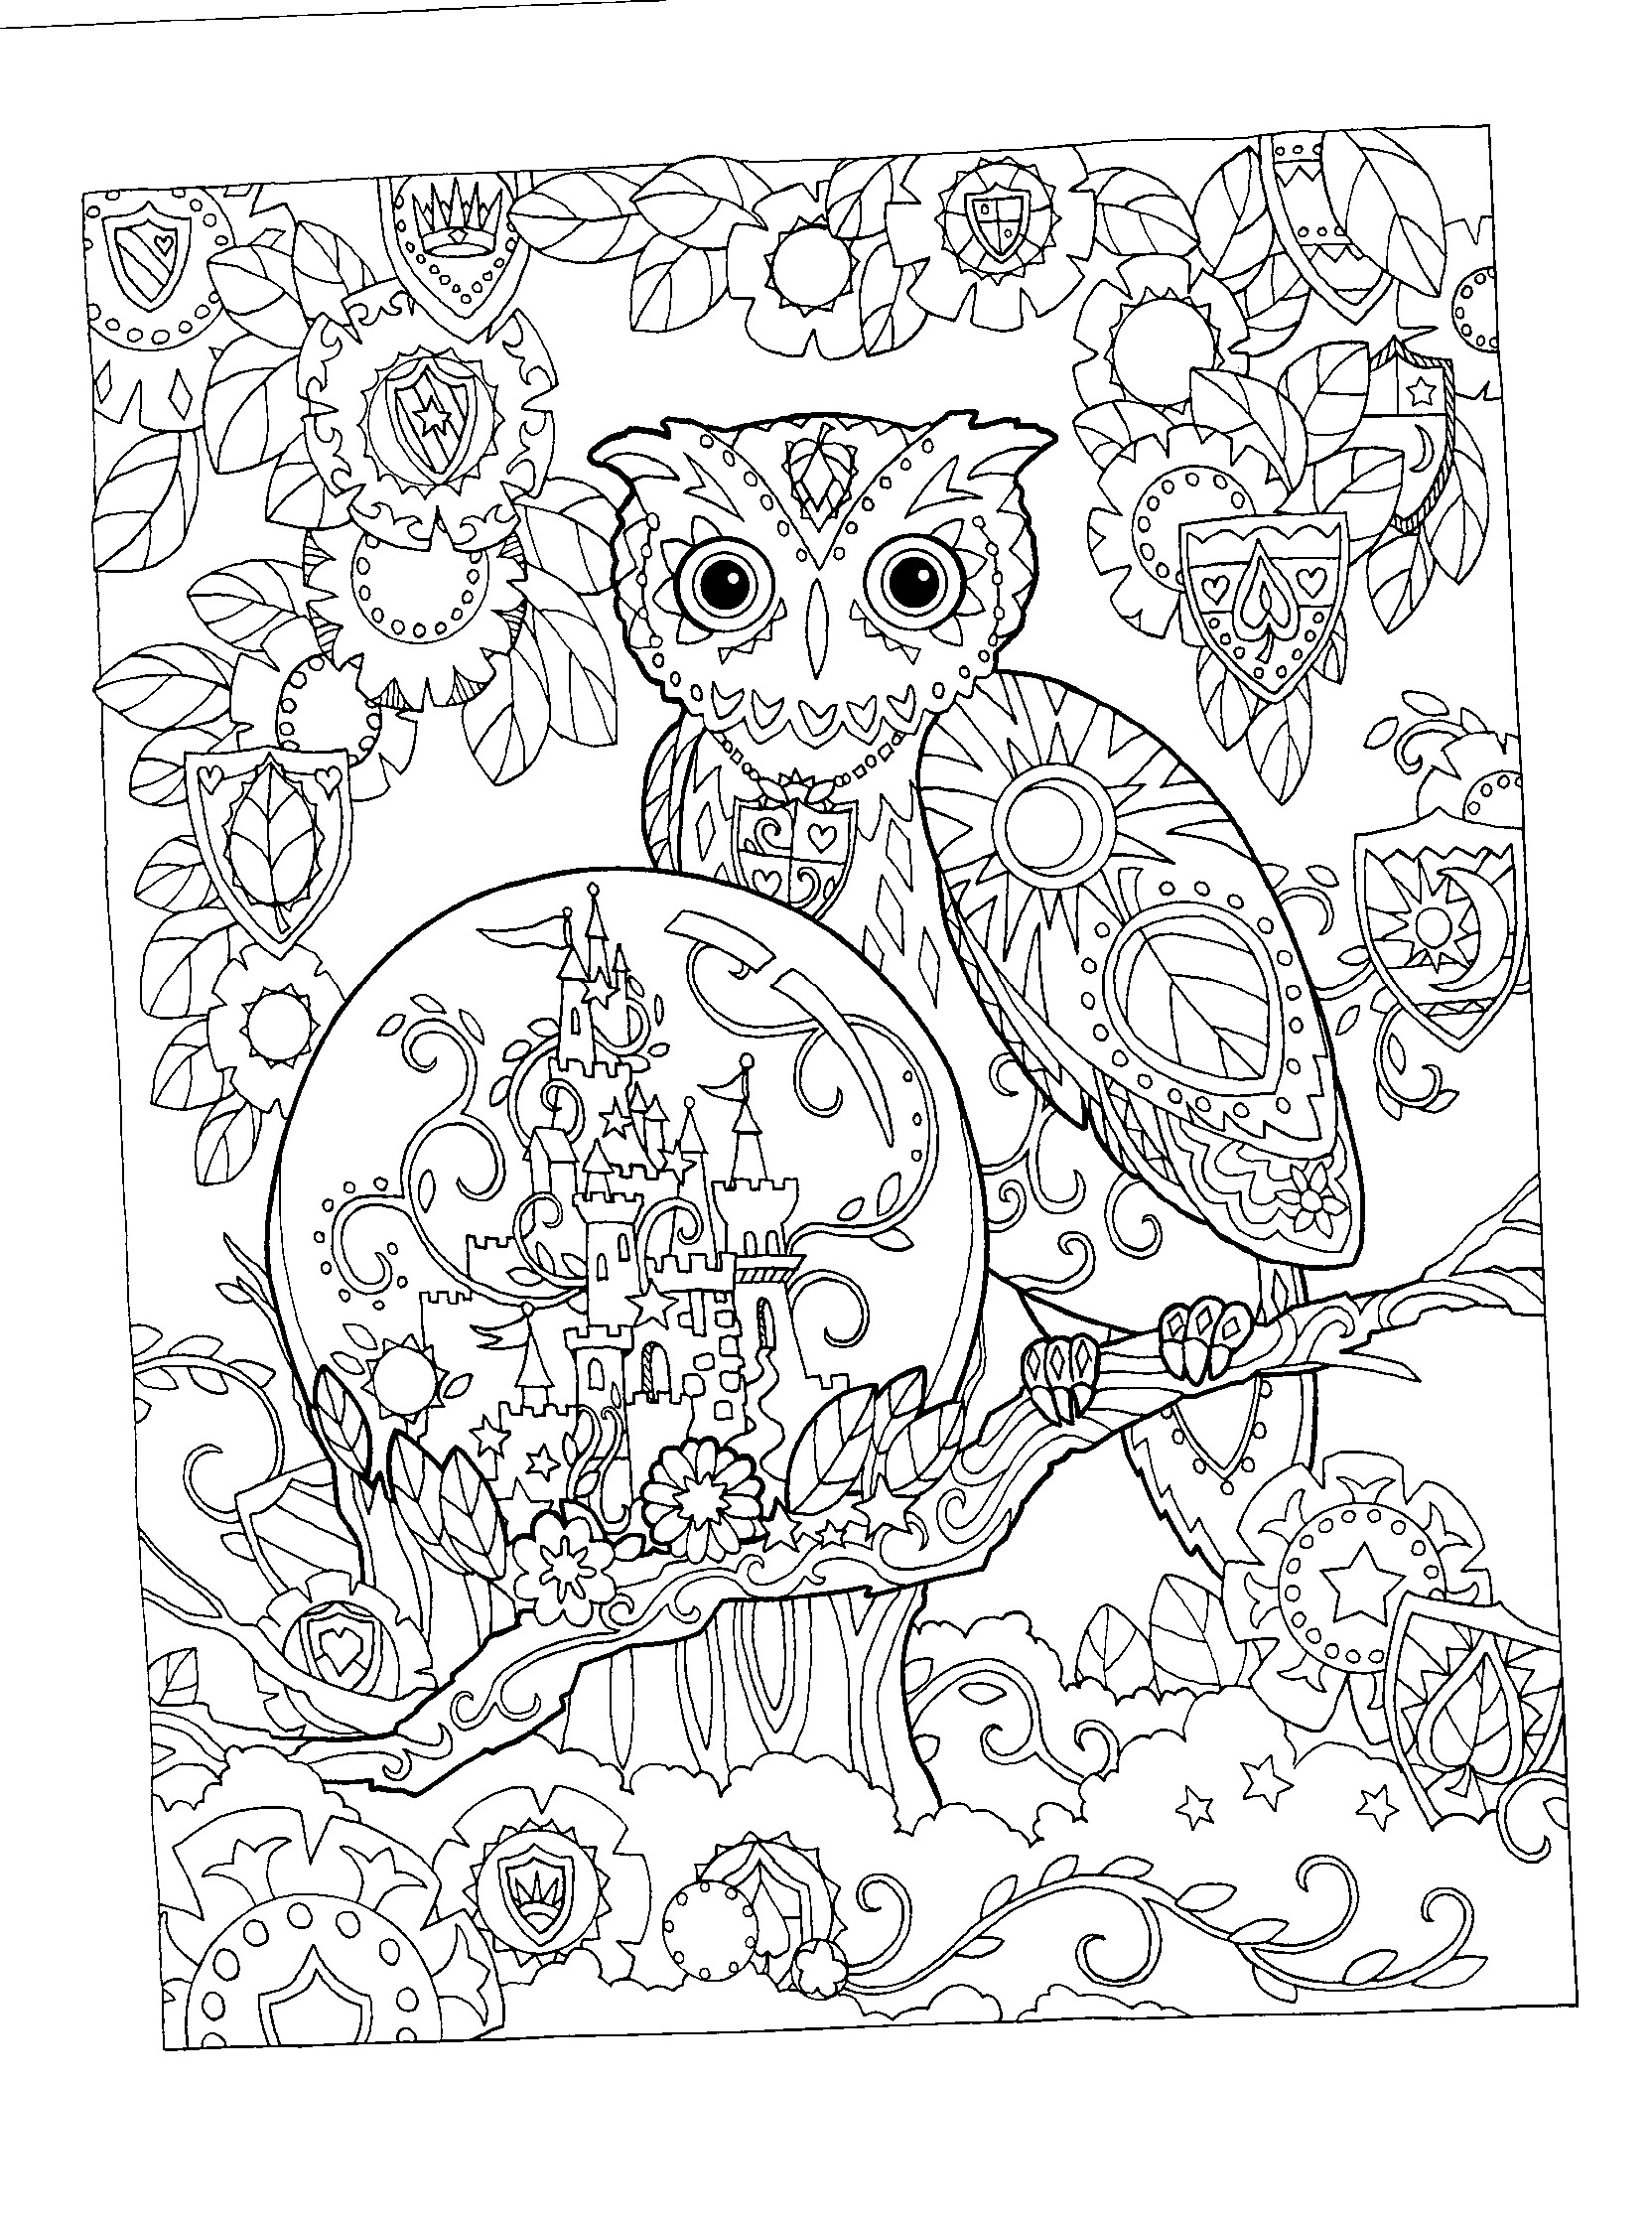 Animal Design Coloring Pages at GetDrawings.com | Free for personal use